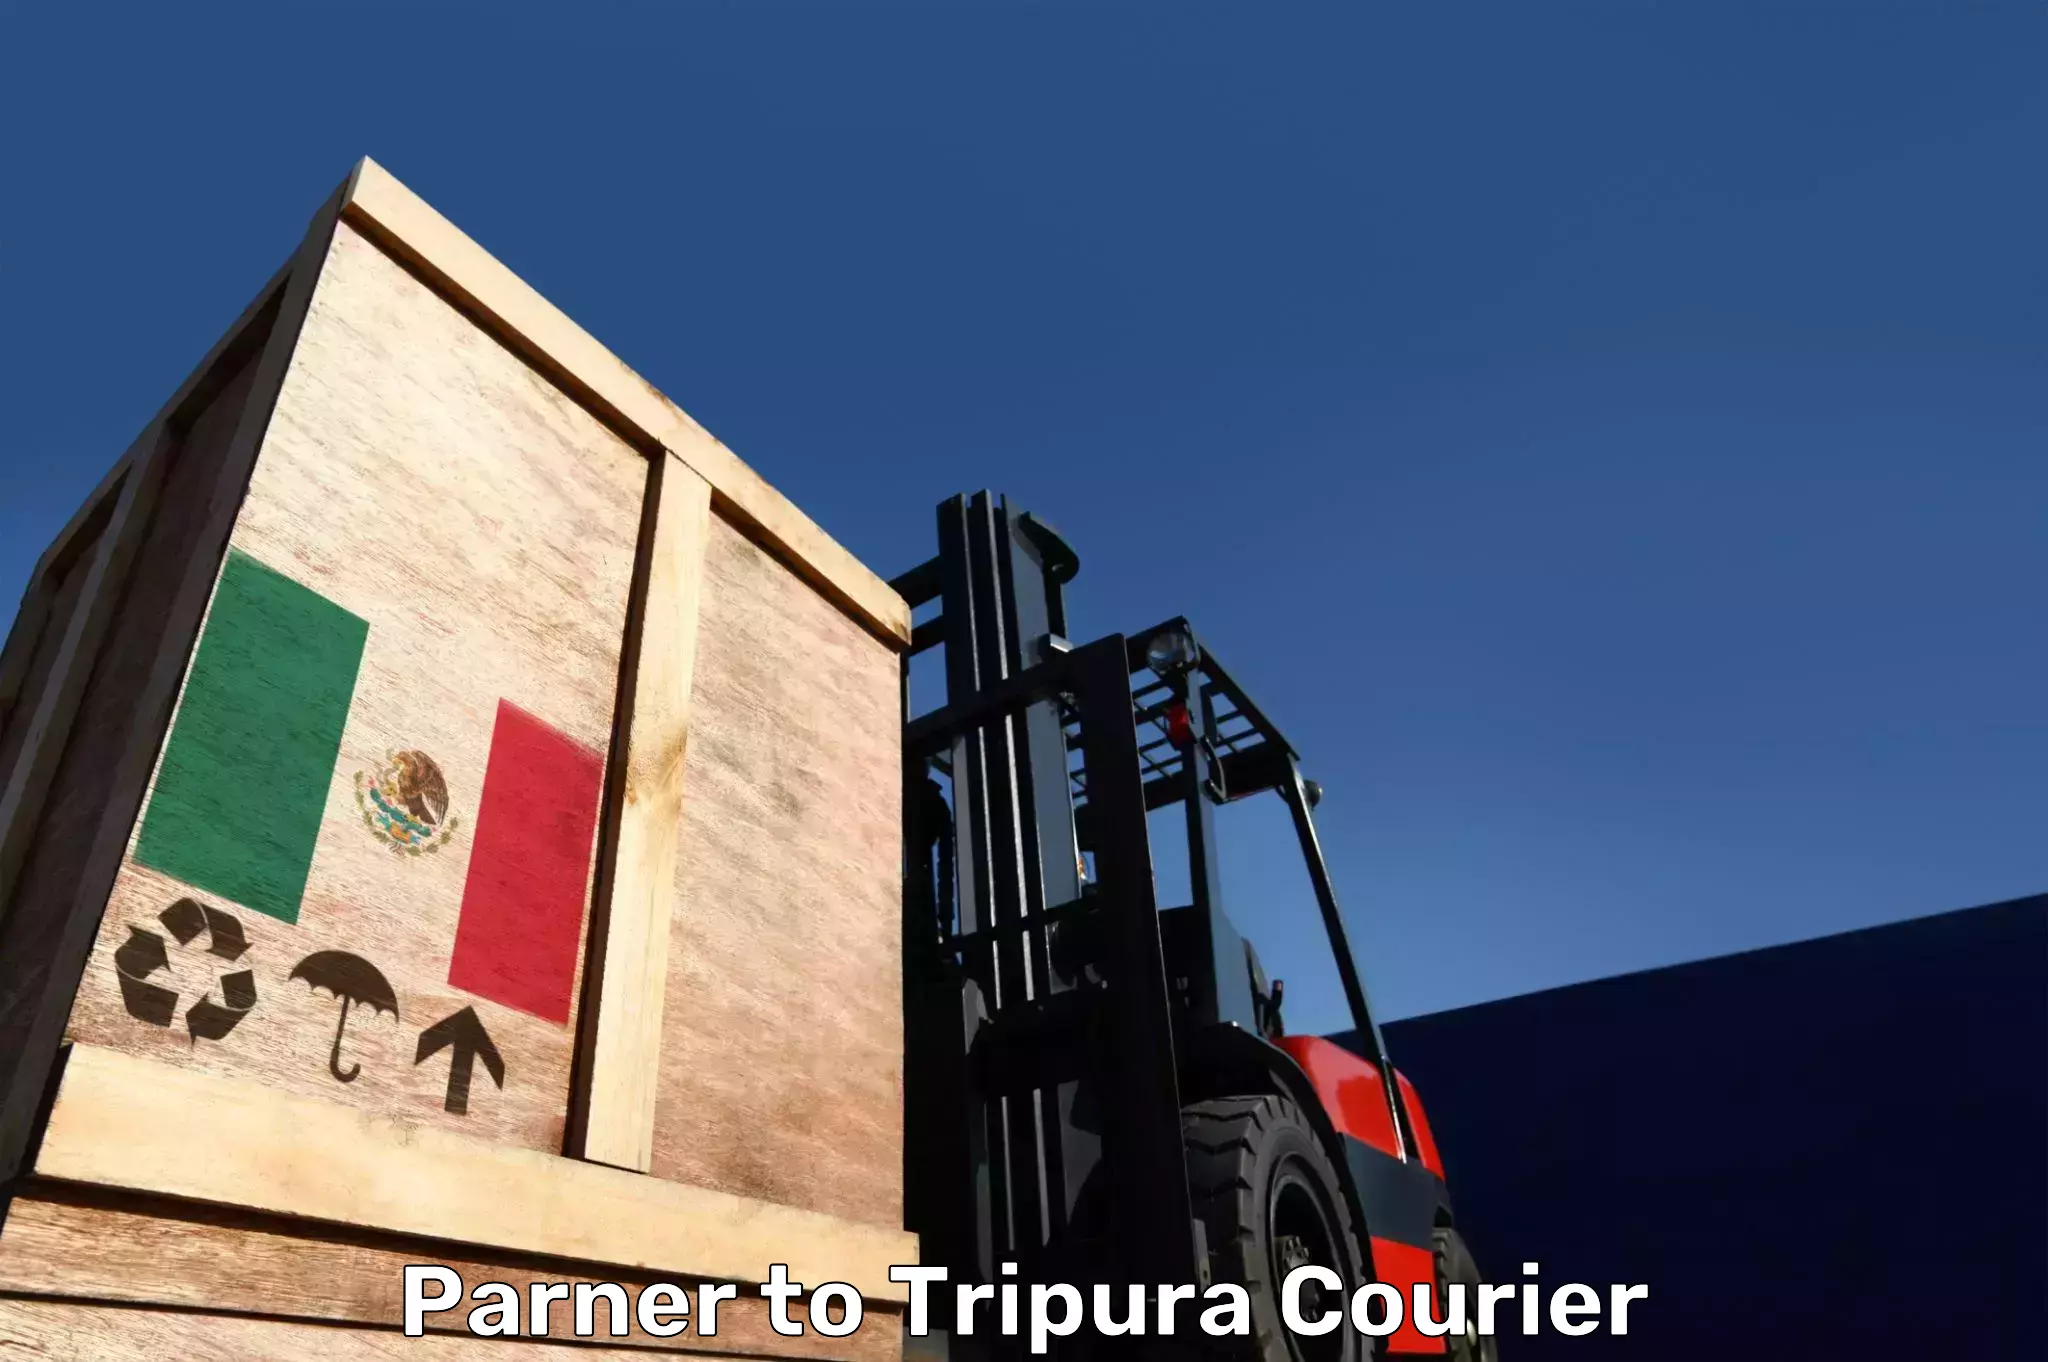 Luggage transport consultancy Parner to Tripura